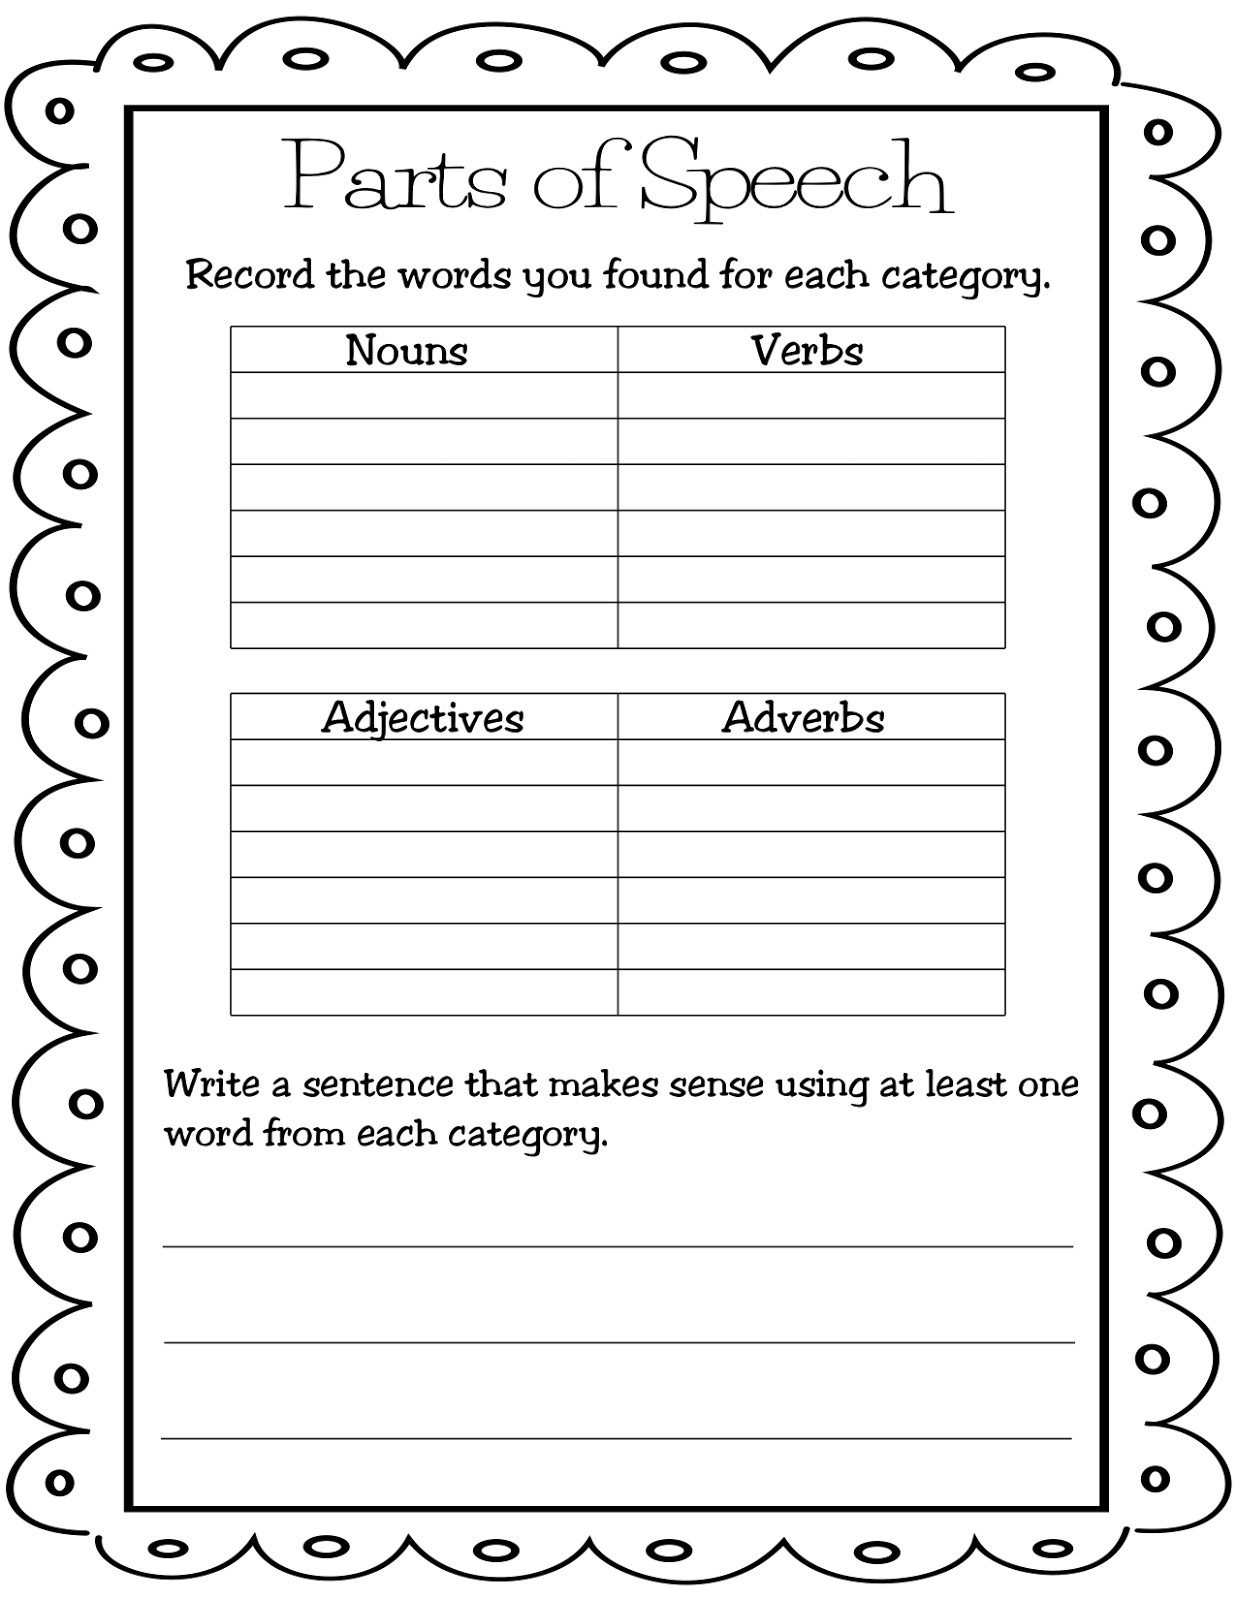 12-best-images-of-identify-parts-of-speech-worksheet-6th-grade-verb